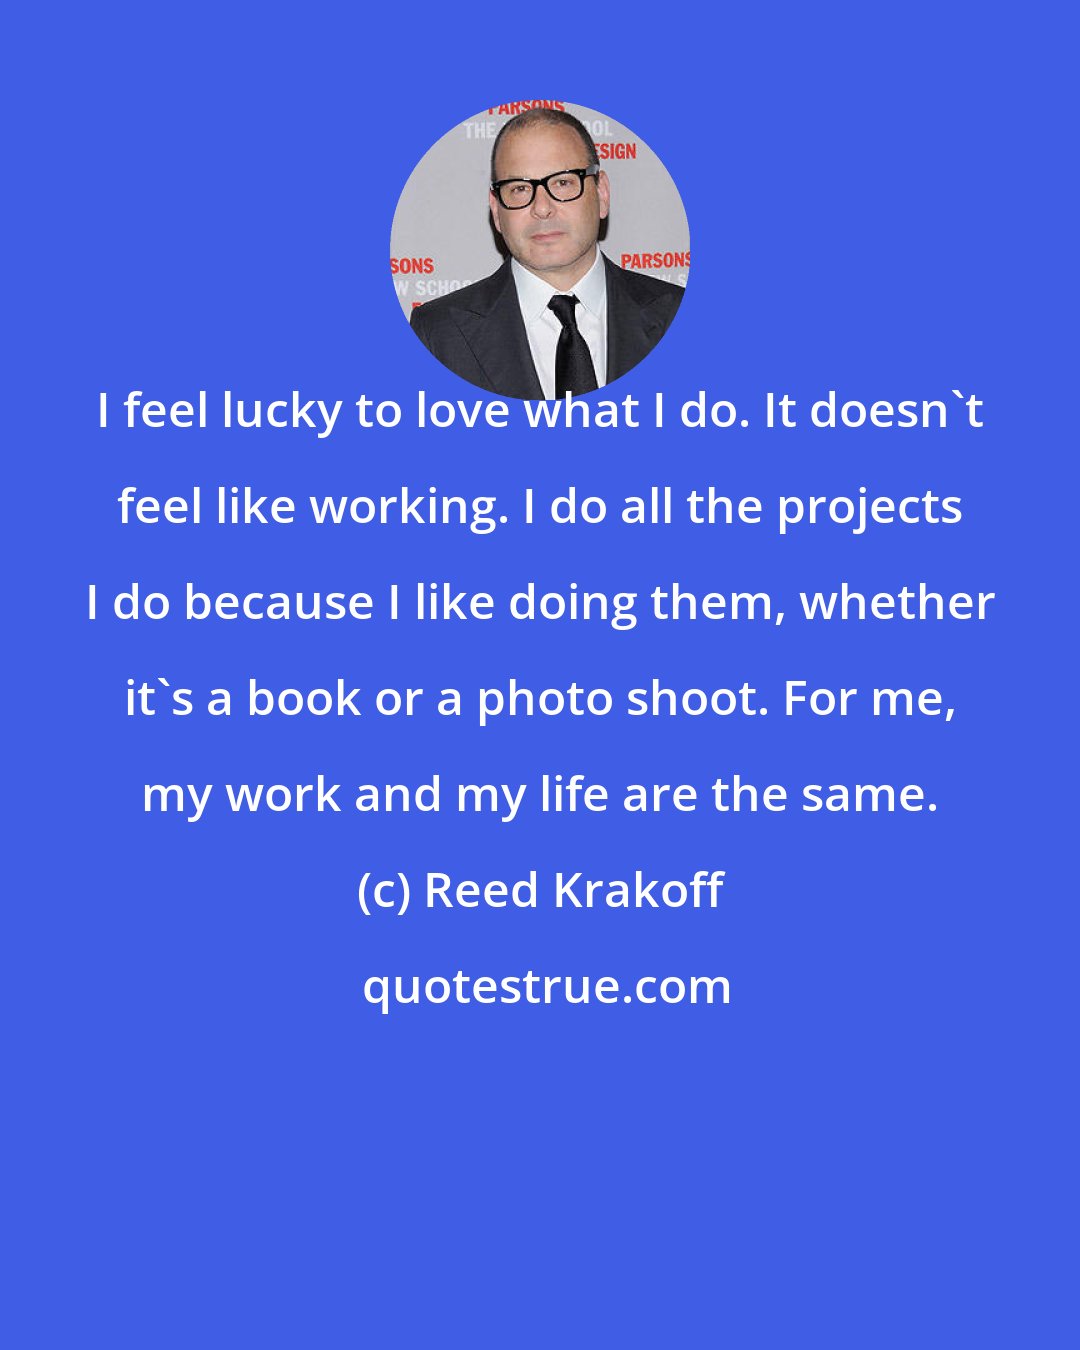 Reed Krakoff: I feel lucky to love what I do. It doesn't feel like working. I do all the projects I do because I like doing them, whether it's a book or a photo shoot. For me, my work and my life are the same.